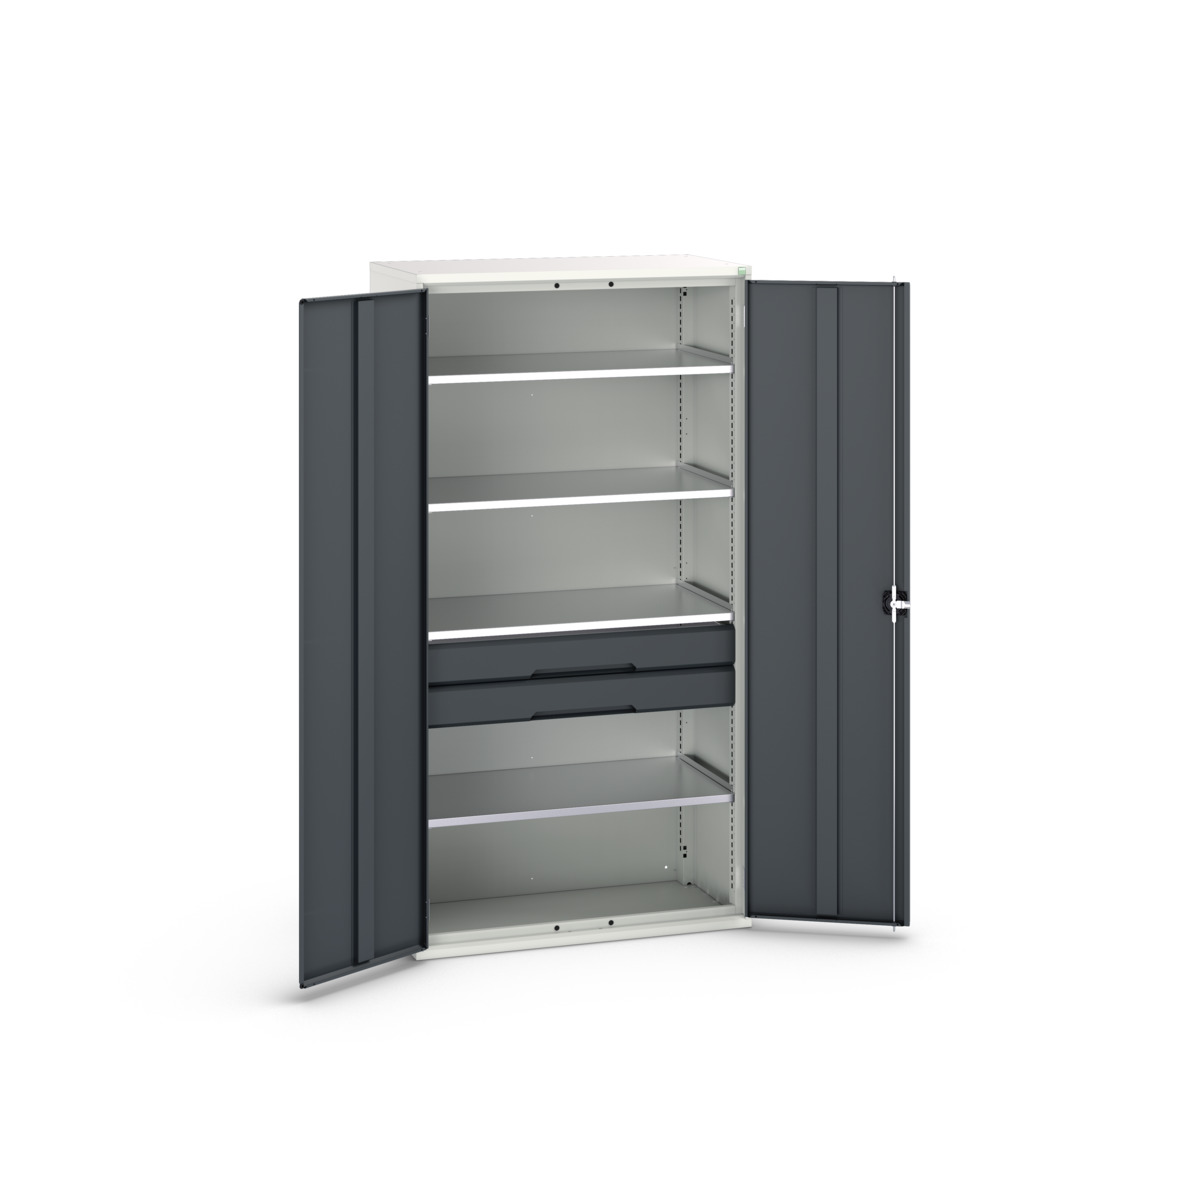 16926574.19 - verso kitted cupboard